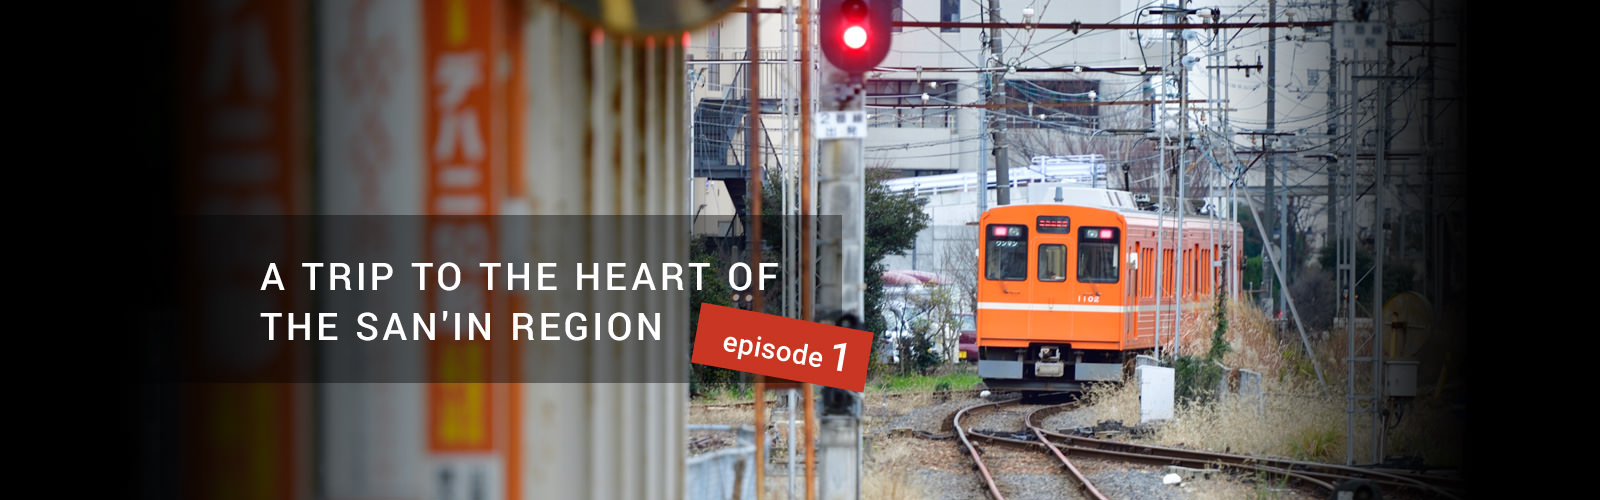 Story - Episode1 | A TRIP TO THE HEART OF THE SAN'IN REGION 